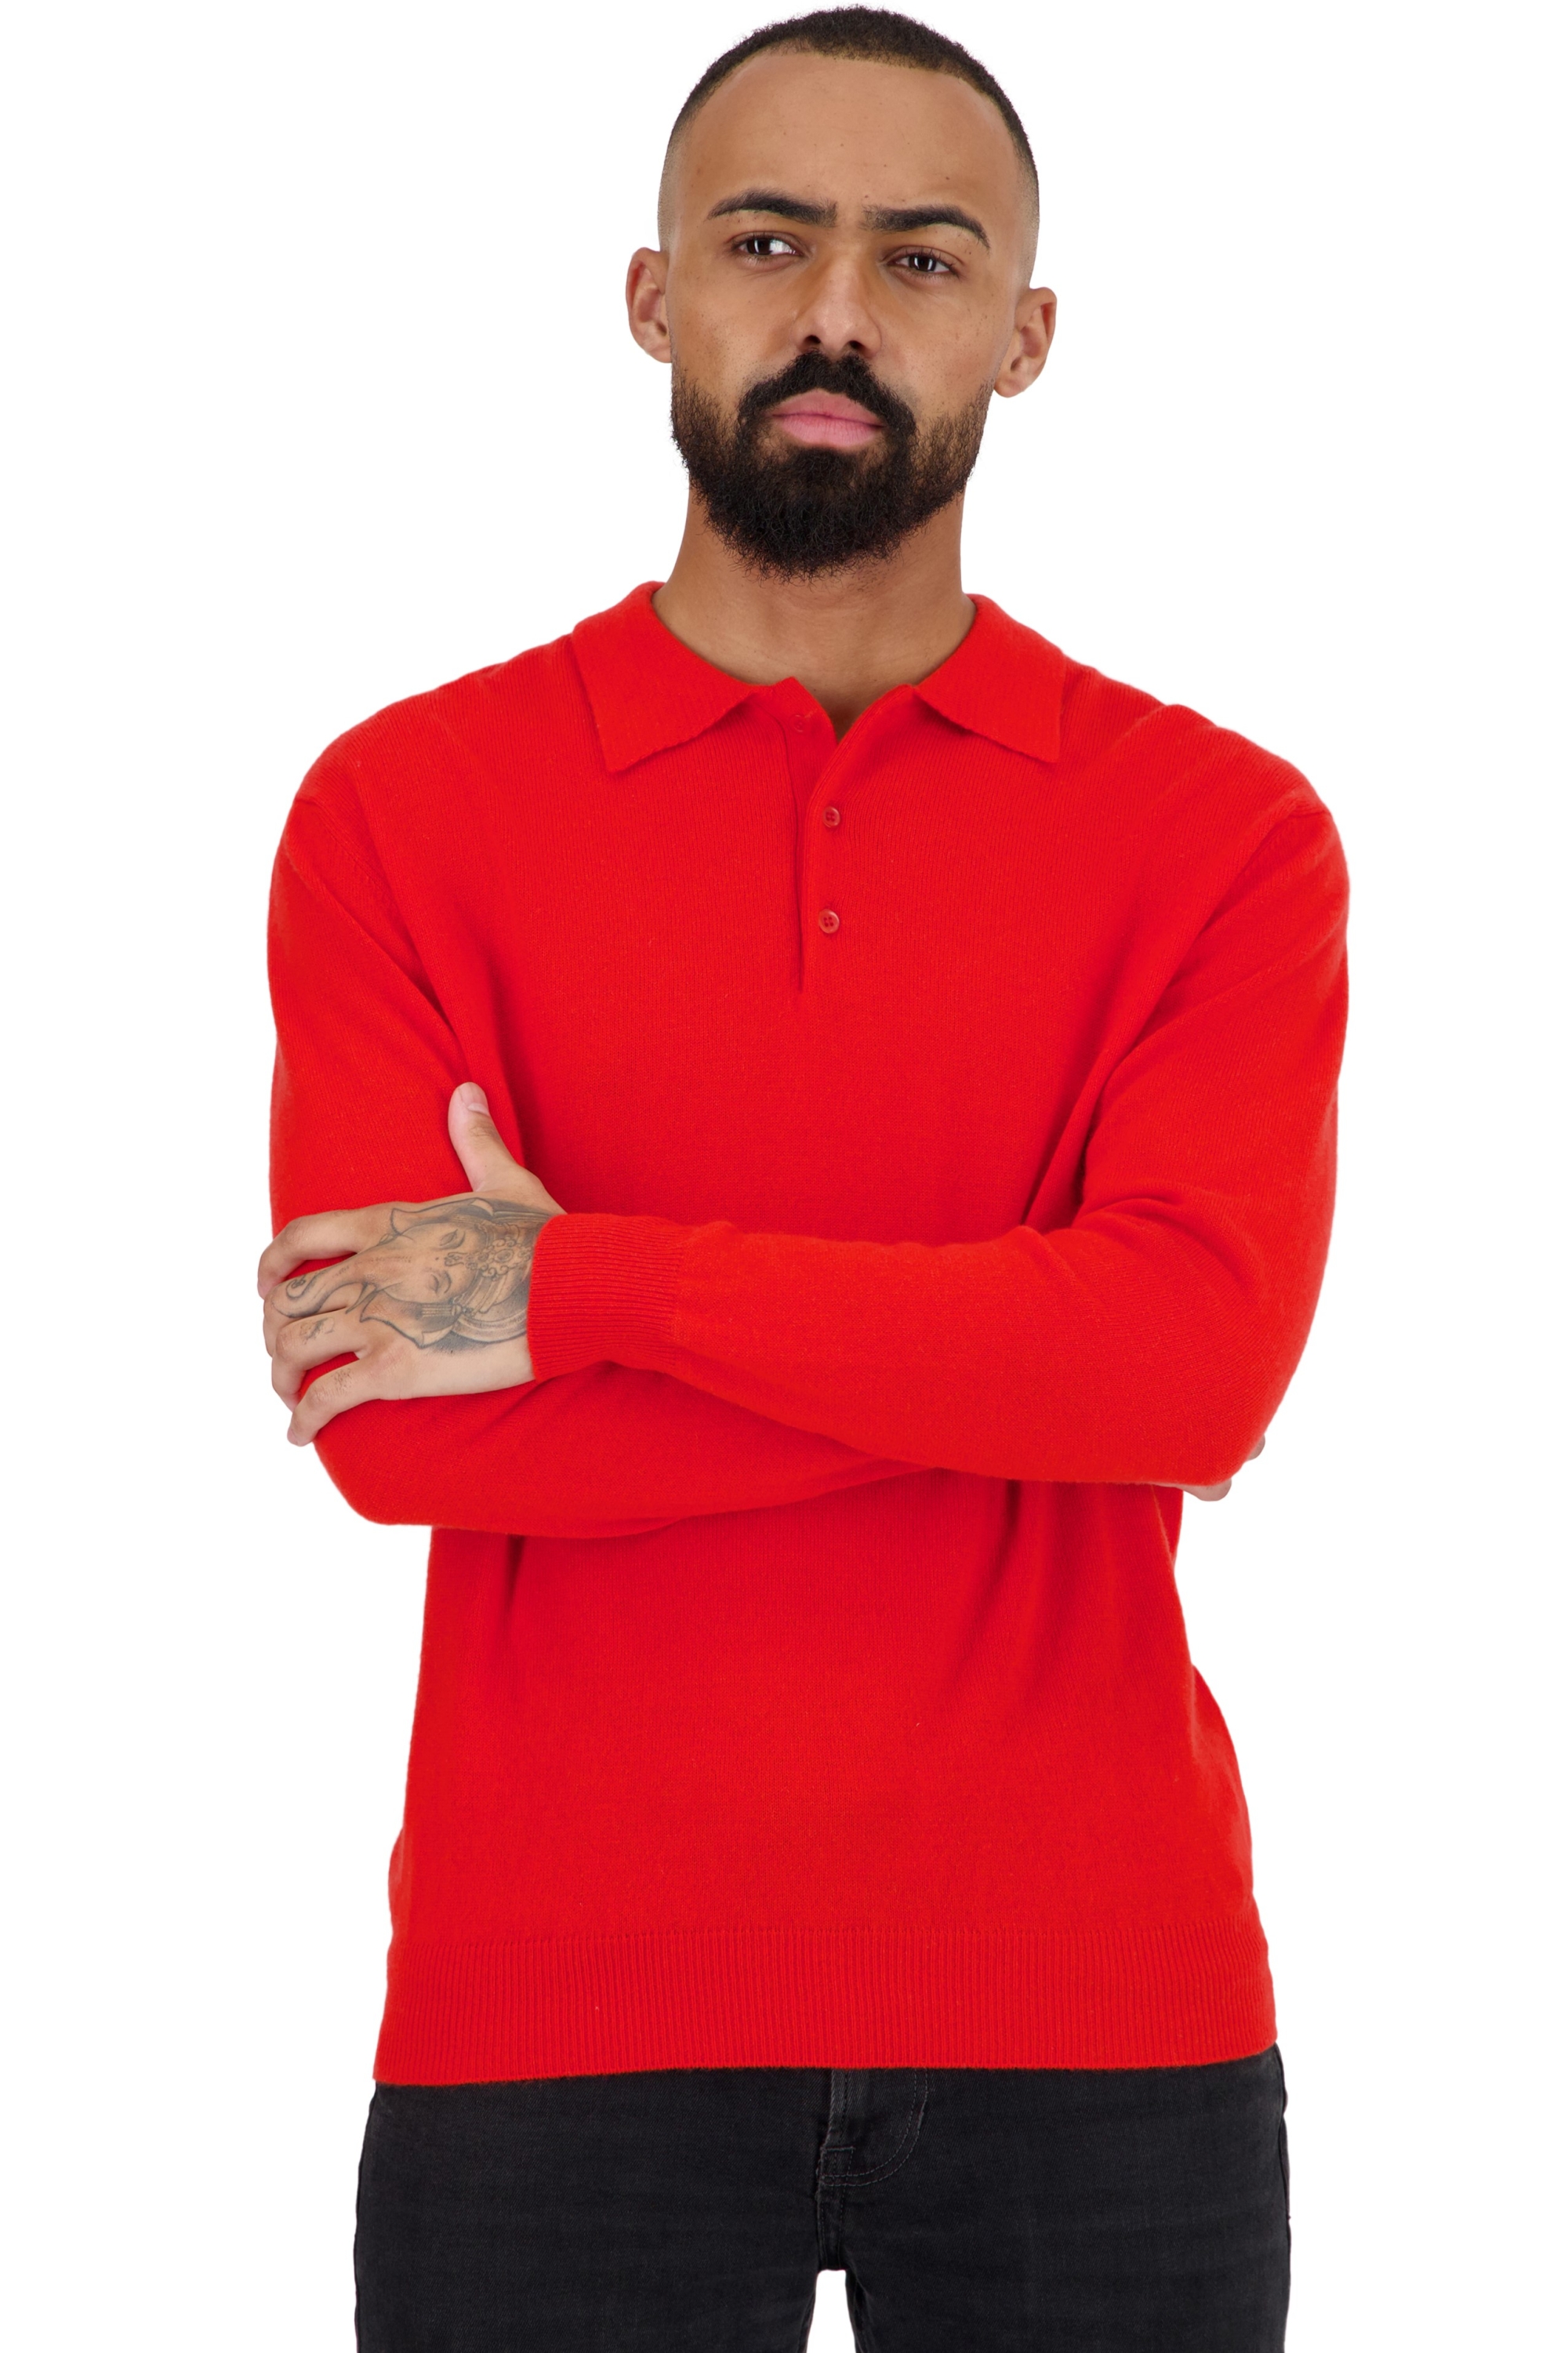 Cachemire polo camionneur homme tarn first tomato 3xl